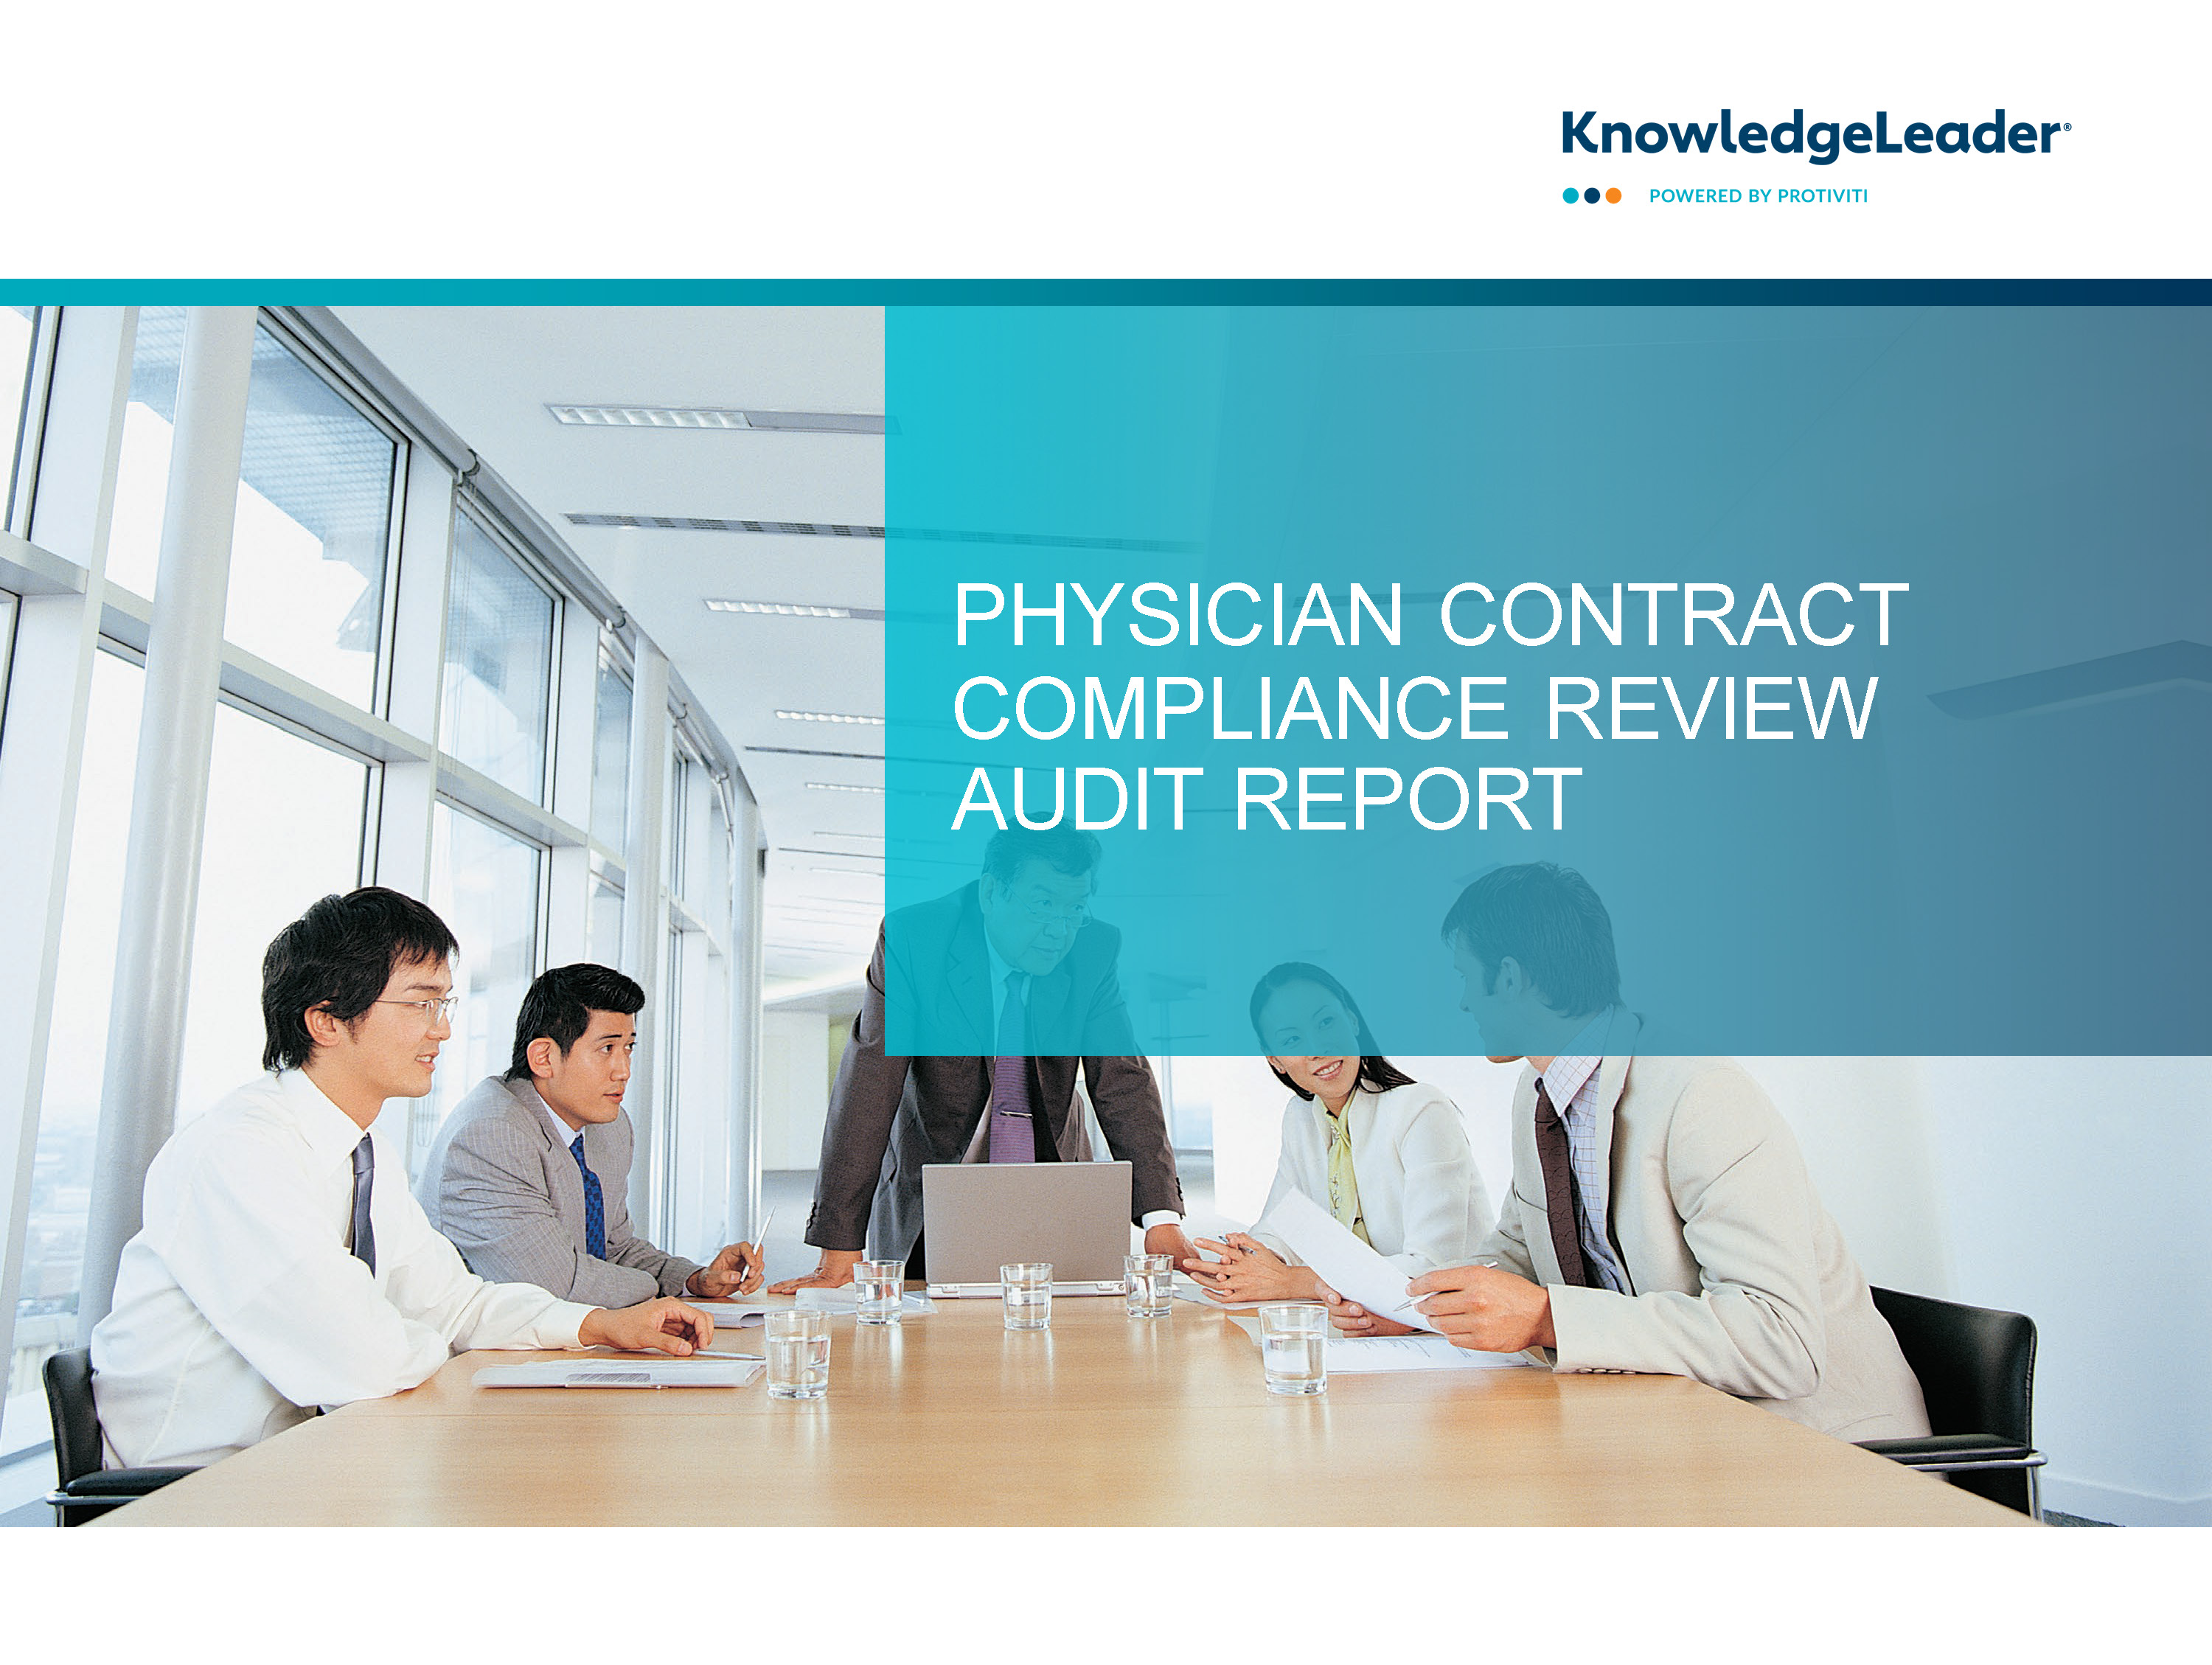 Screenshot of the first page of Physician Contract Compliance Review Audit Report